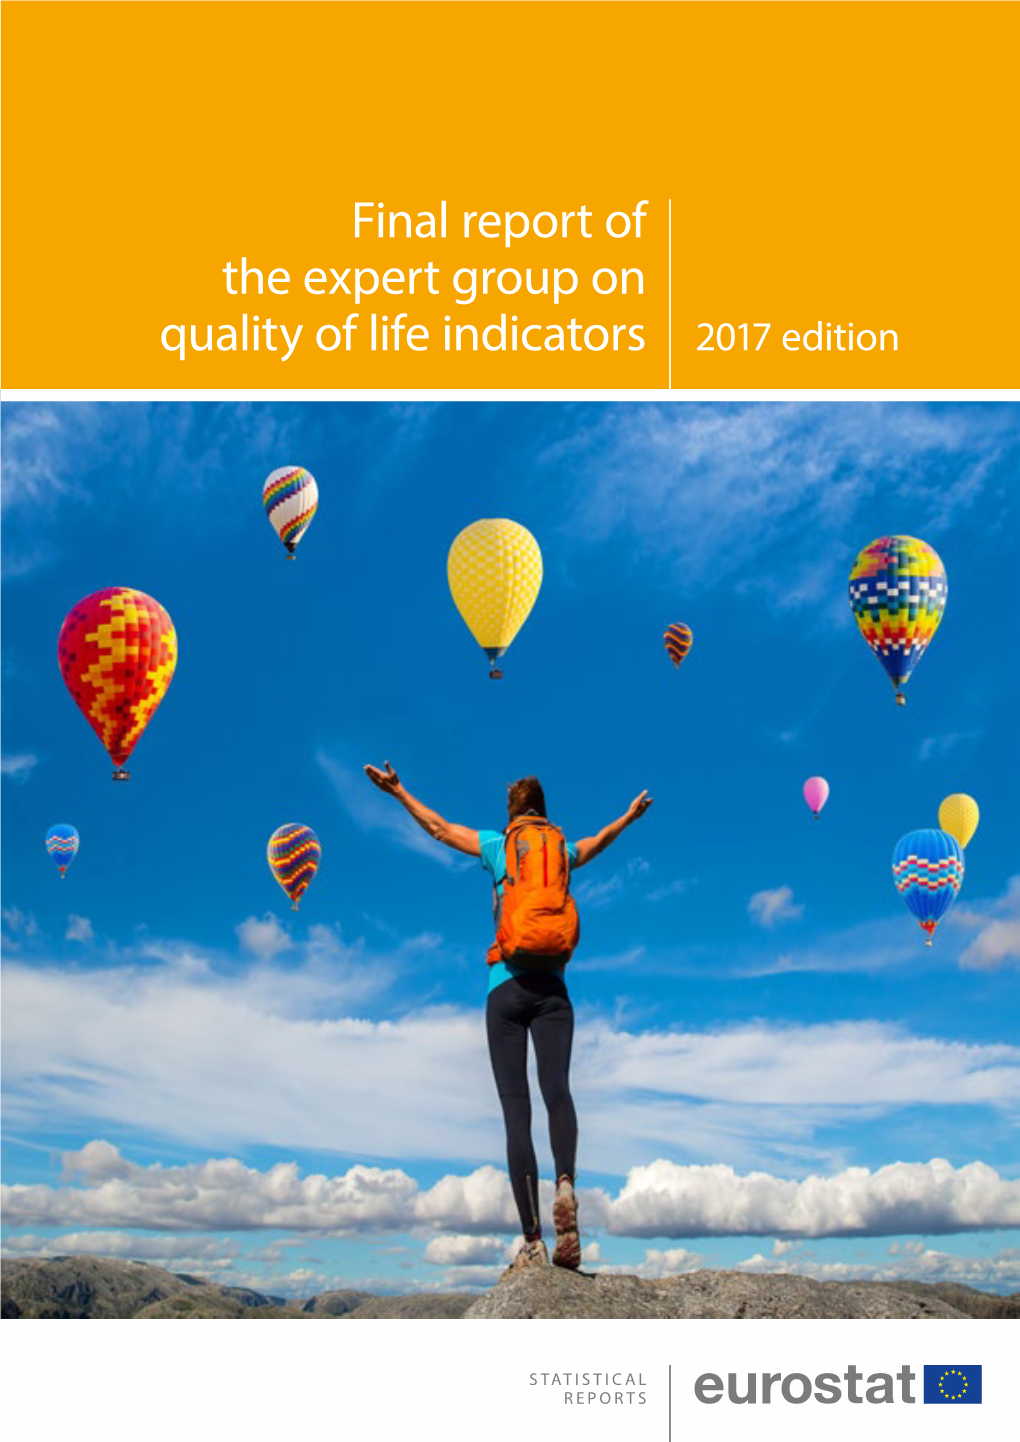 Final Report of the Expert Group on Quality of Life Indicators 2017 Edition